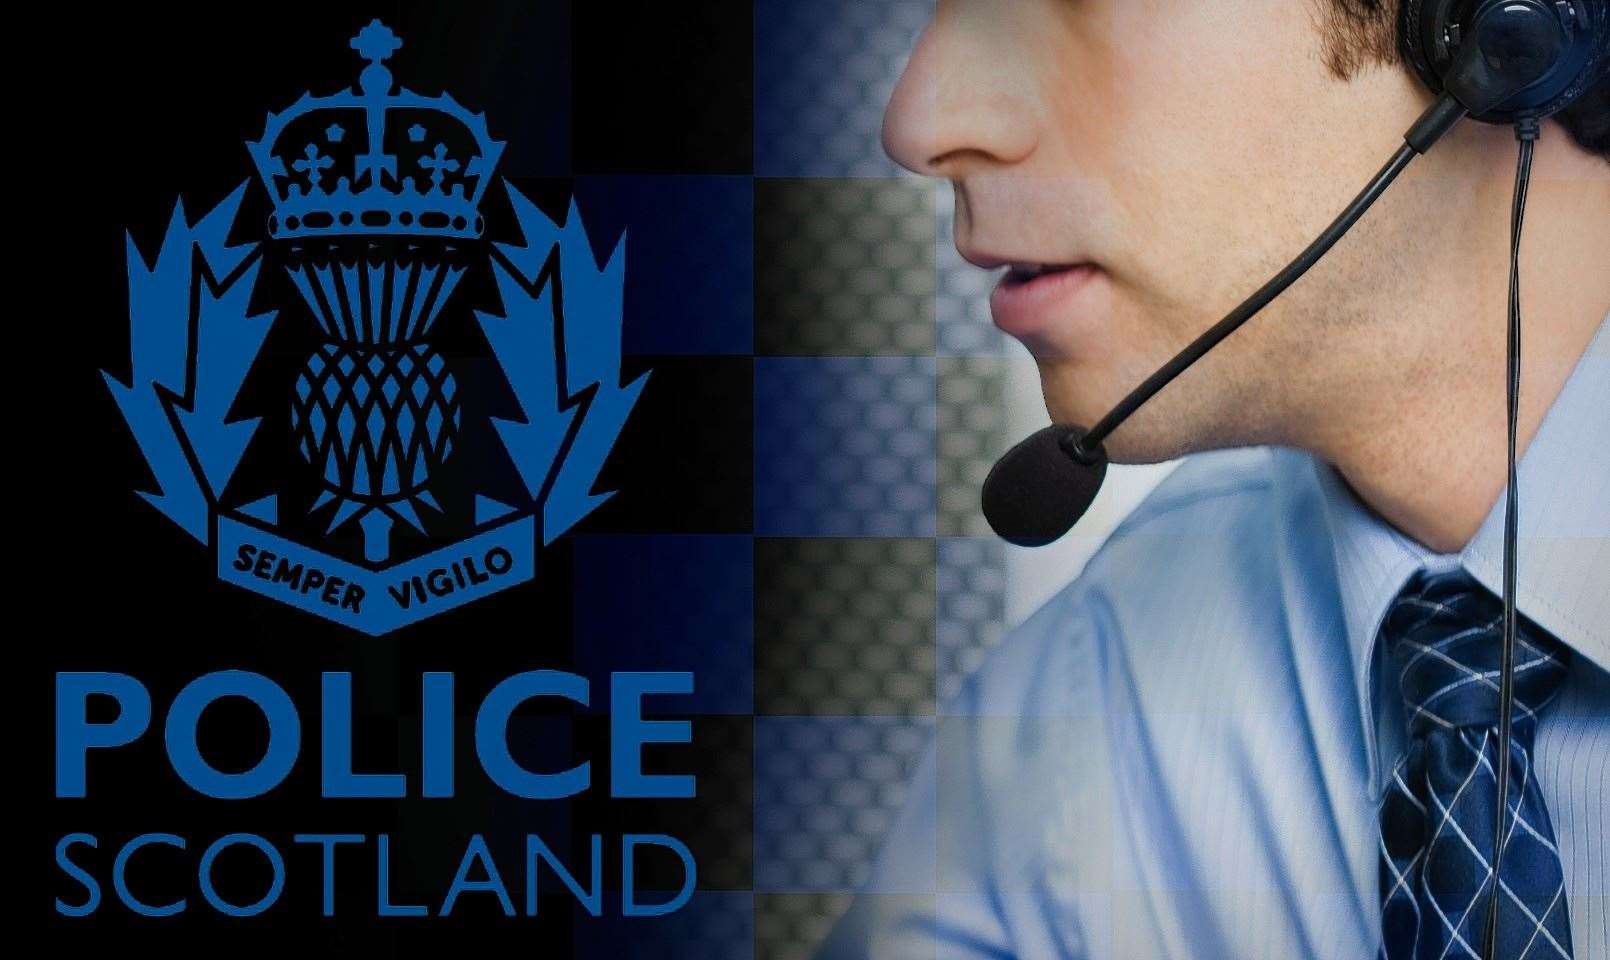 Emergency 999 calls will always be prioritised, Police Scotland said.